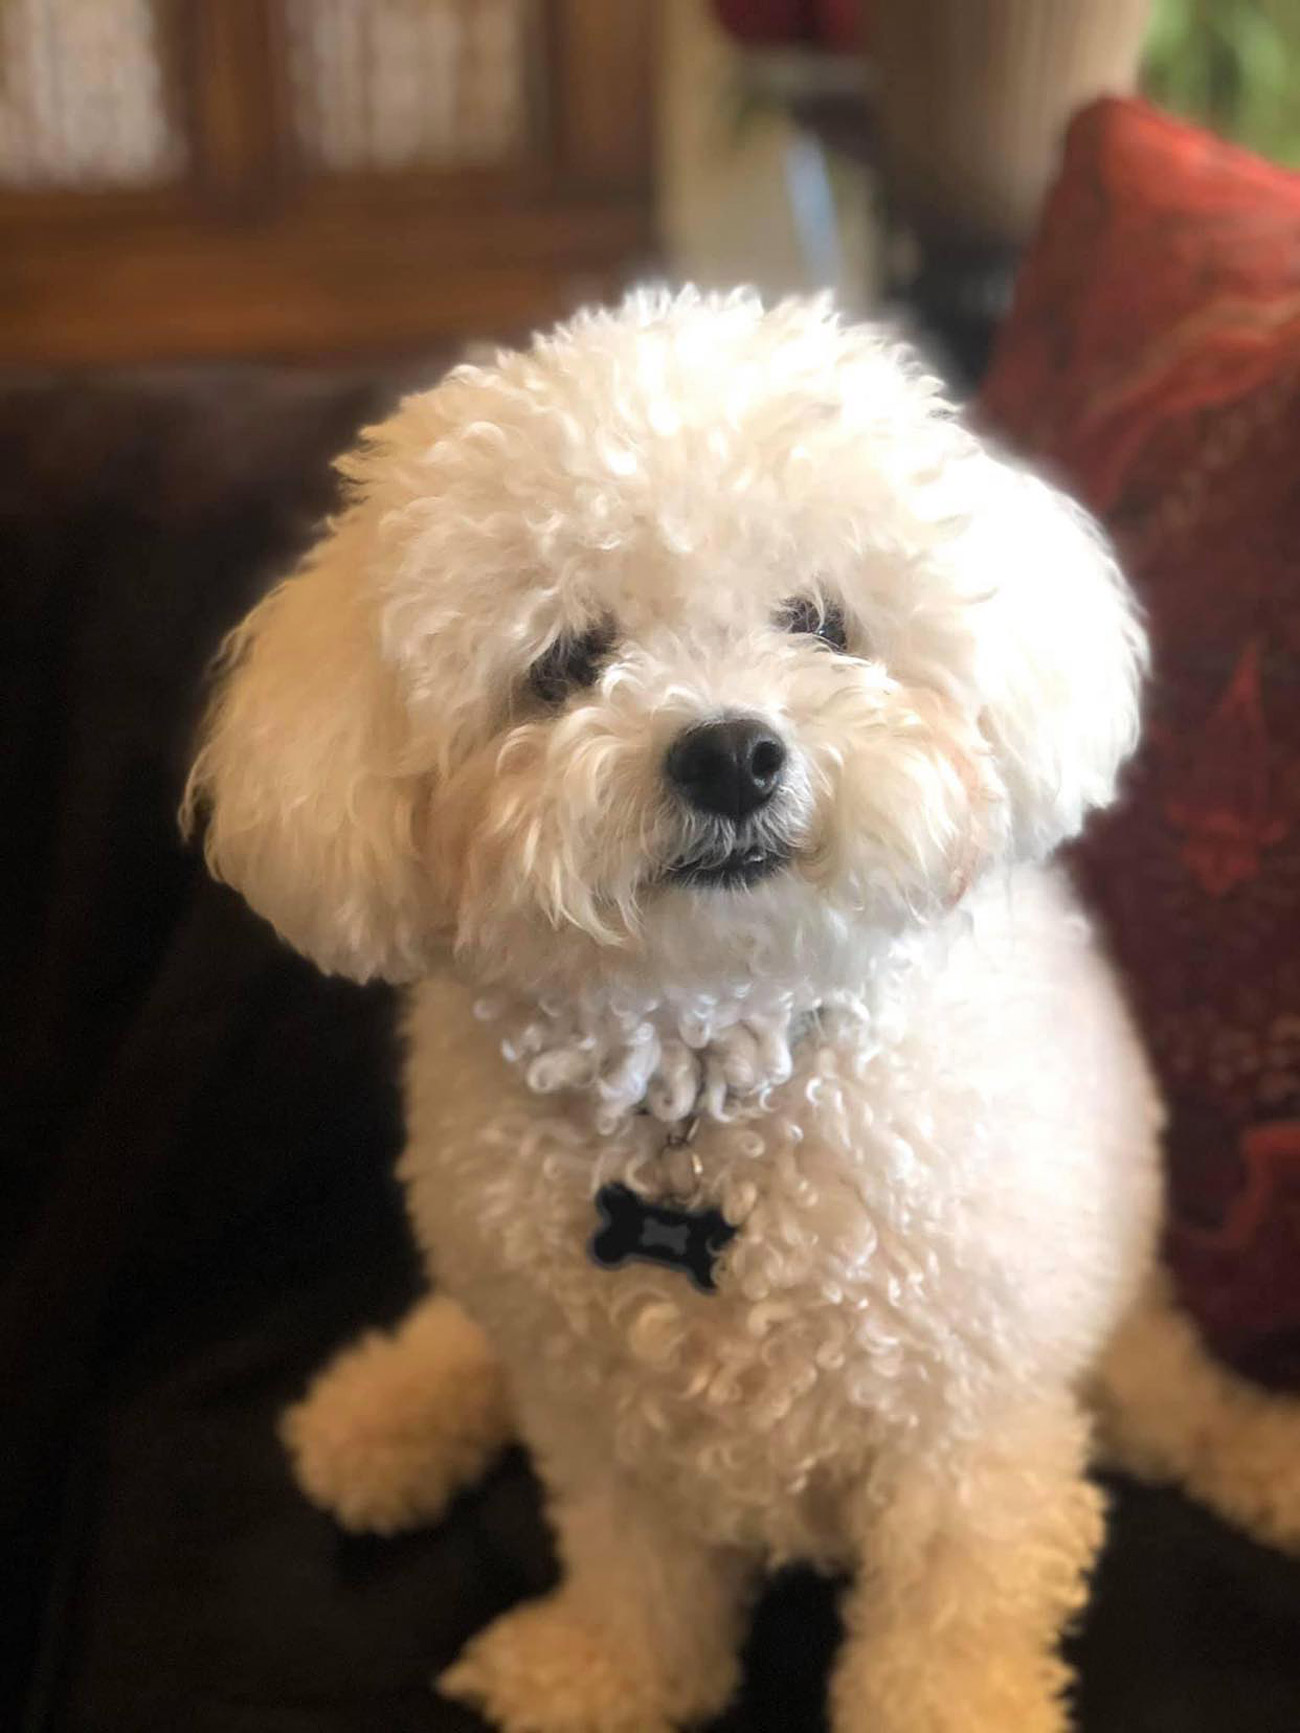 Meet Karen G. from San Antonio, Texas and her almost-five-year-old Bichon Frise, Tucker! Her family has a long-standing tradition of loving Bichons; in fact her father the Colonel brought in the first of their Bichons.